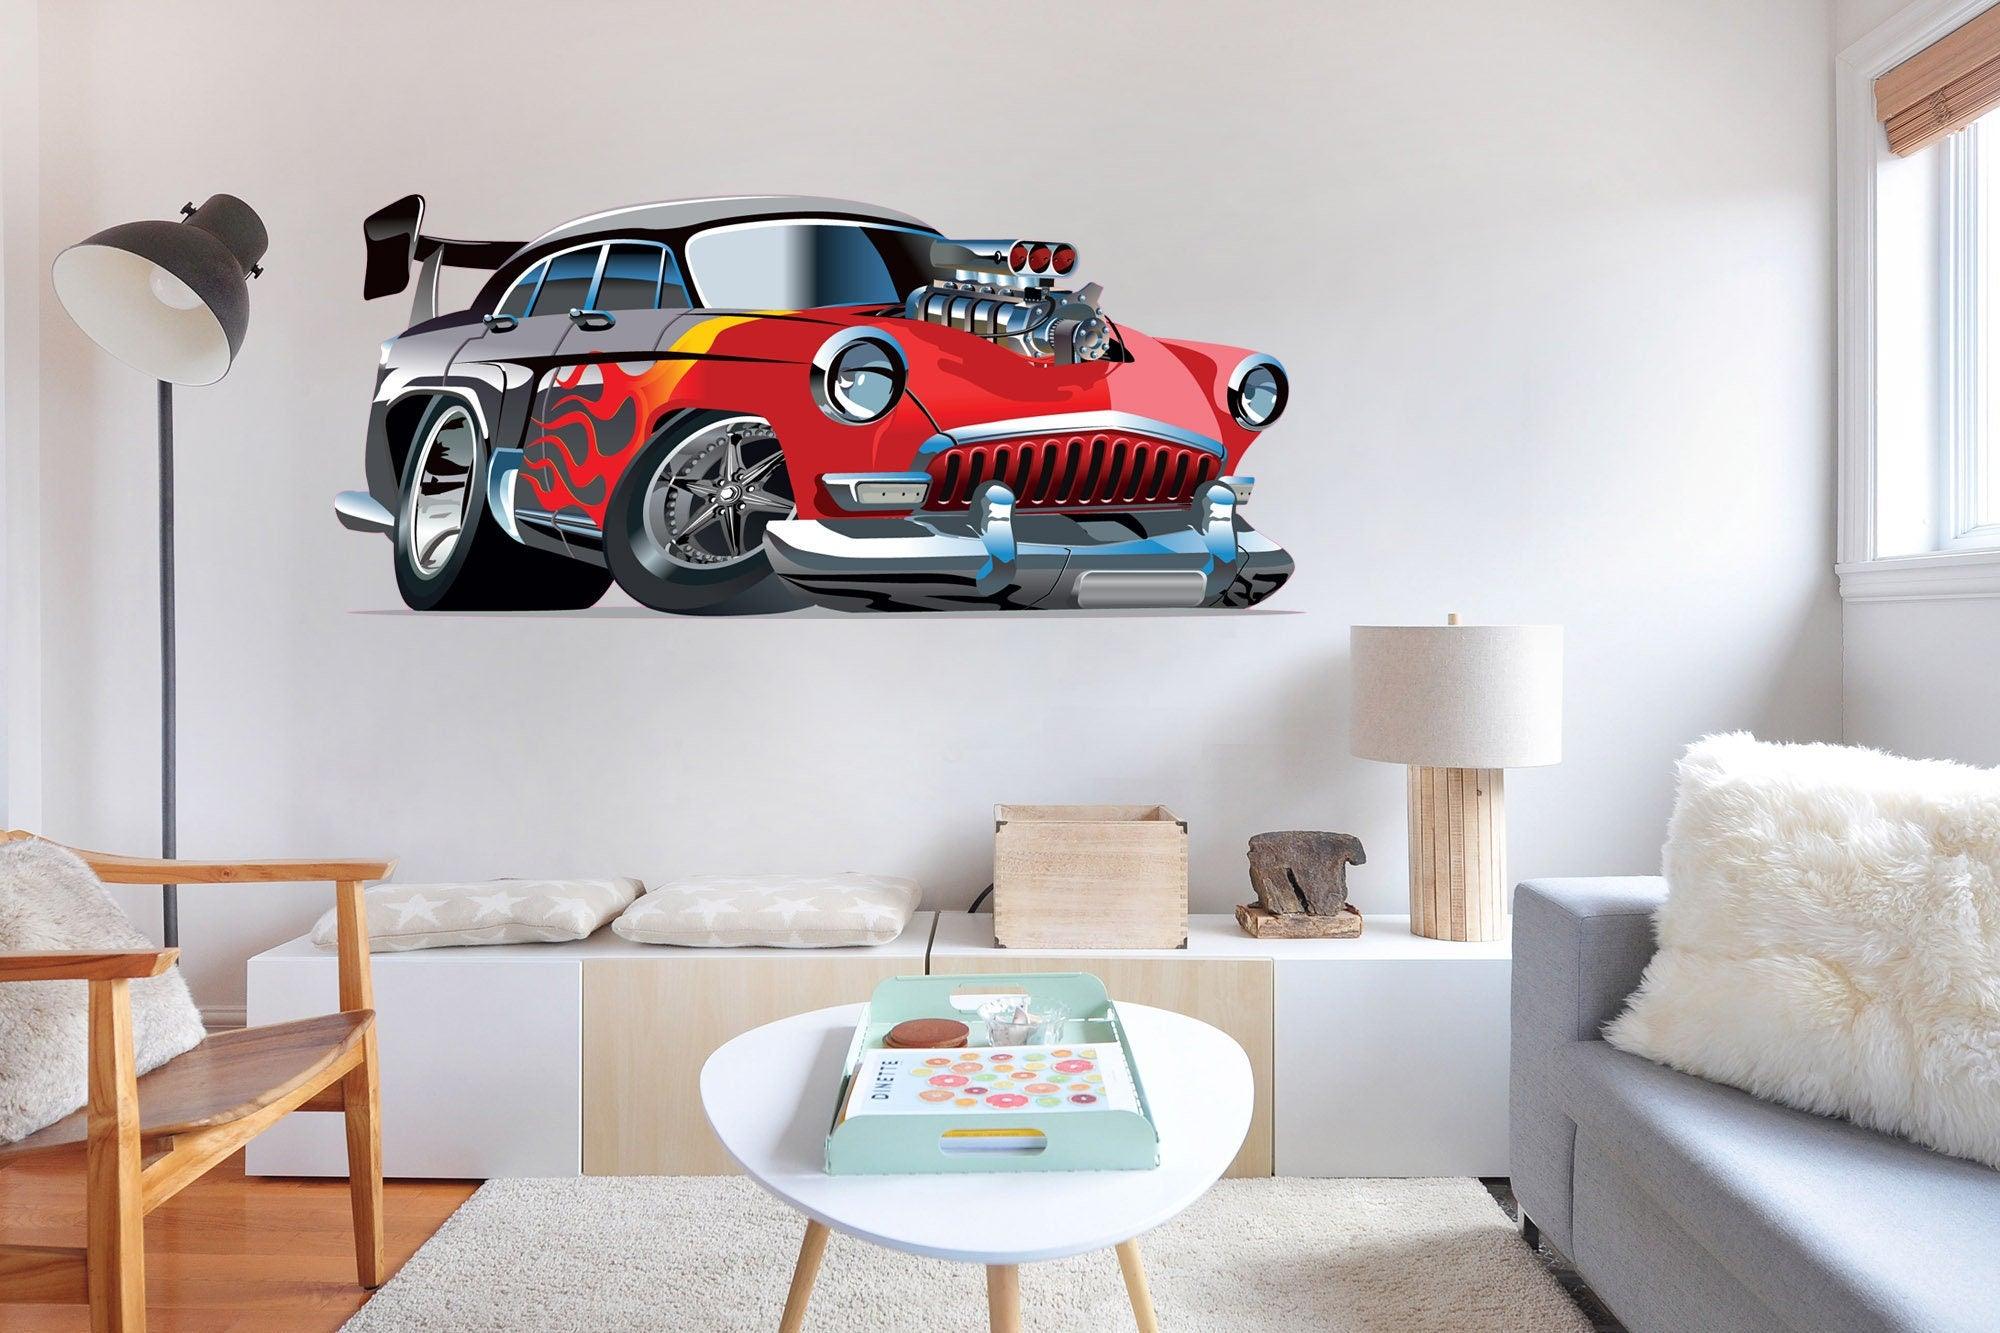 Kids Room Hot Rod Decal, Car Decal